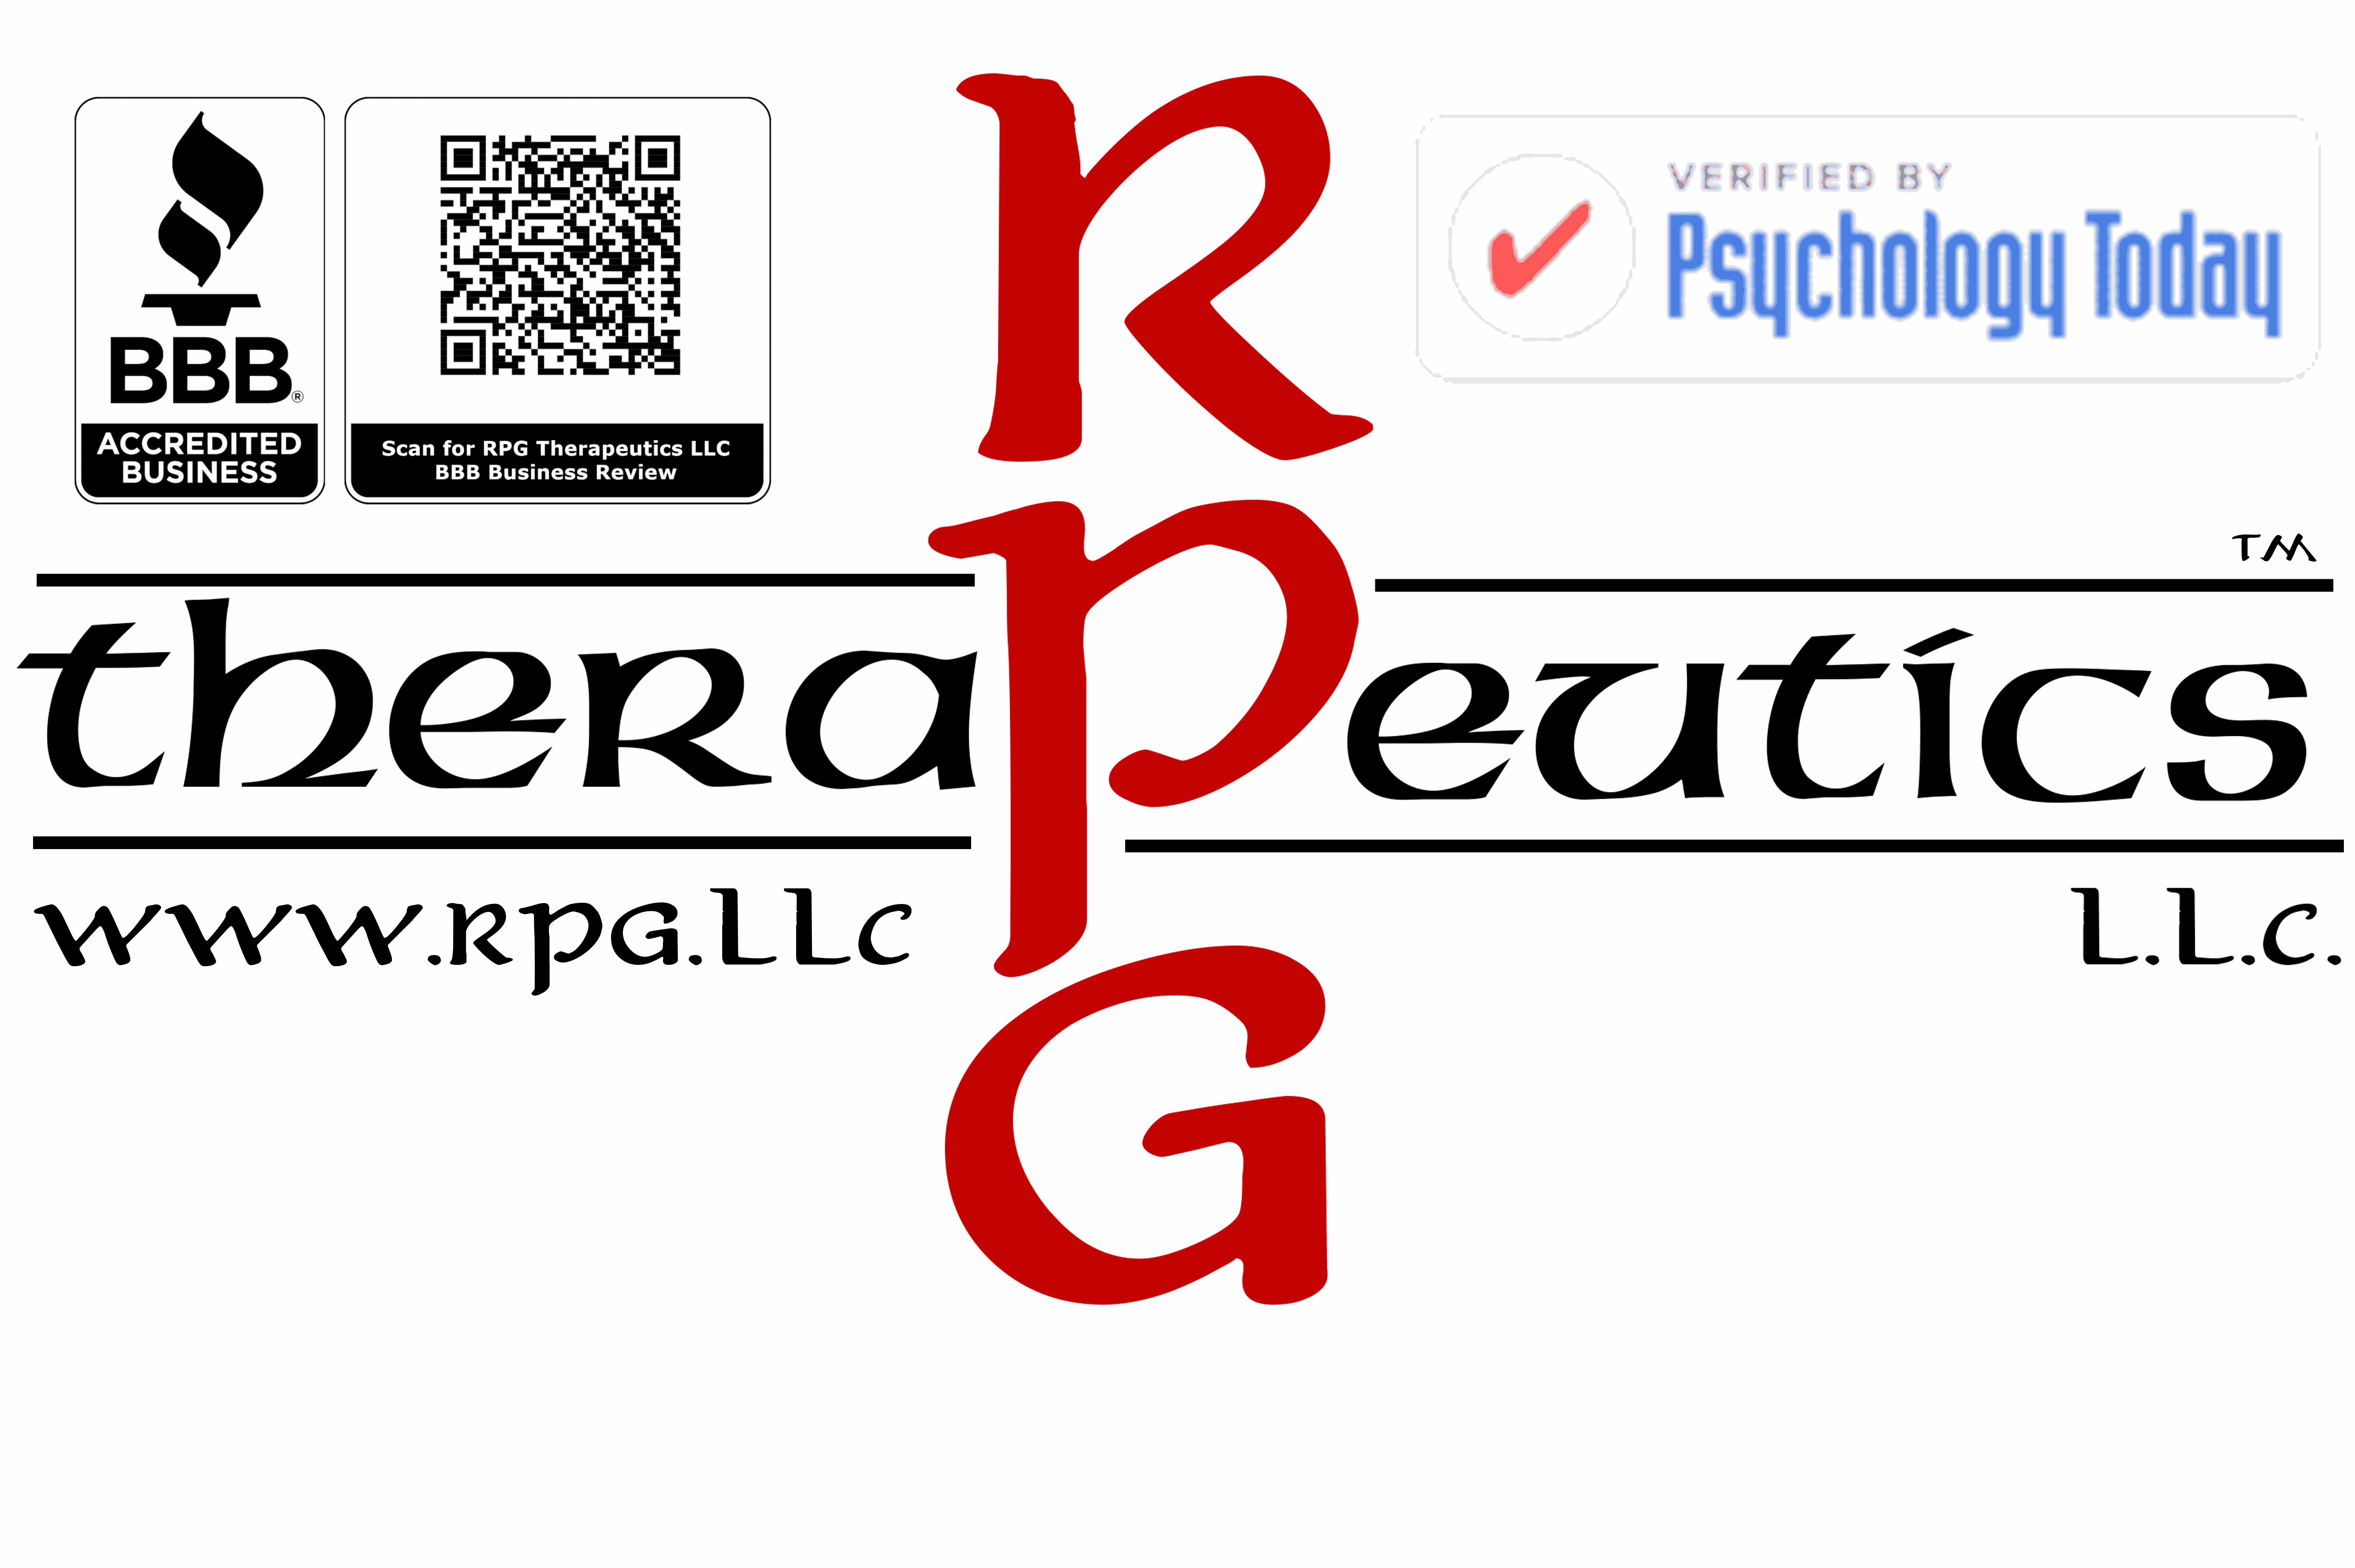 RPG Therapeutics LLC Website https://rpgtherapy.com/